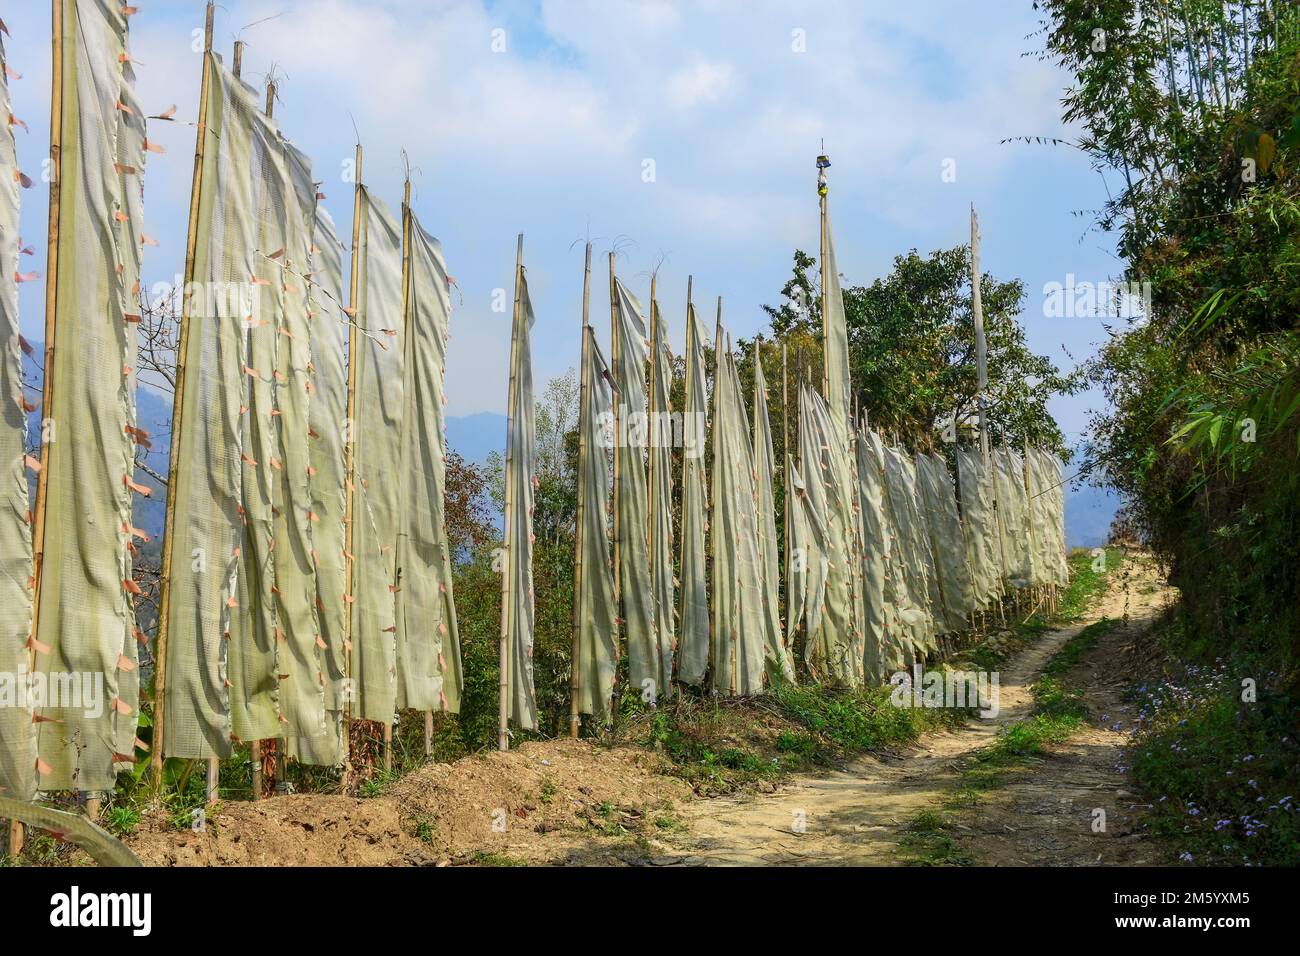 A row of white tall prayer flags on poles , Pala Busty ,Kalimpong West Bengal India Stock Photo